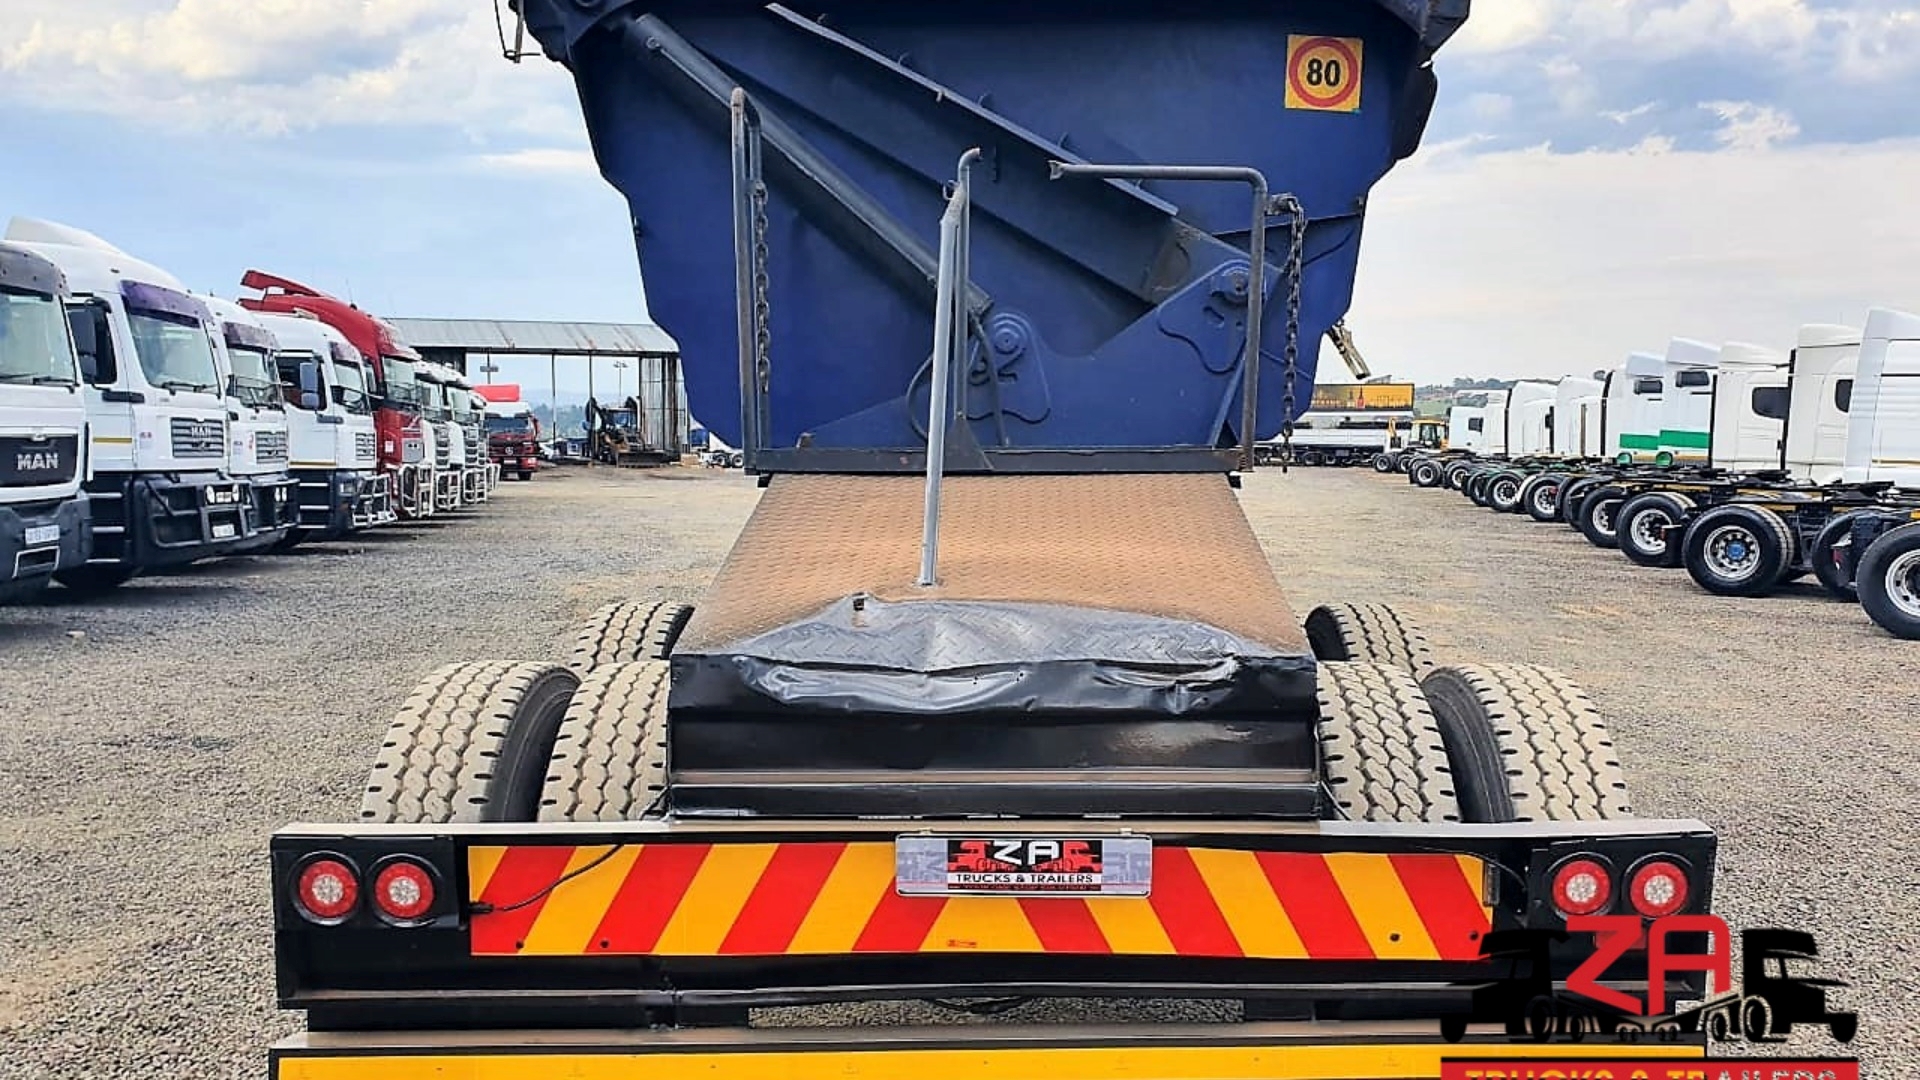 SA Truck Bodies Trailers Side tipper 25CUBE SIDE TIPPER TRAILER SA TRUCK BODIES 2015 for sale by ZA Trucks and Trailers Sales | Truck & Trailer Marketplaces